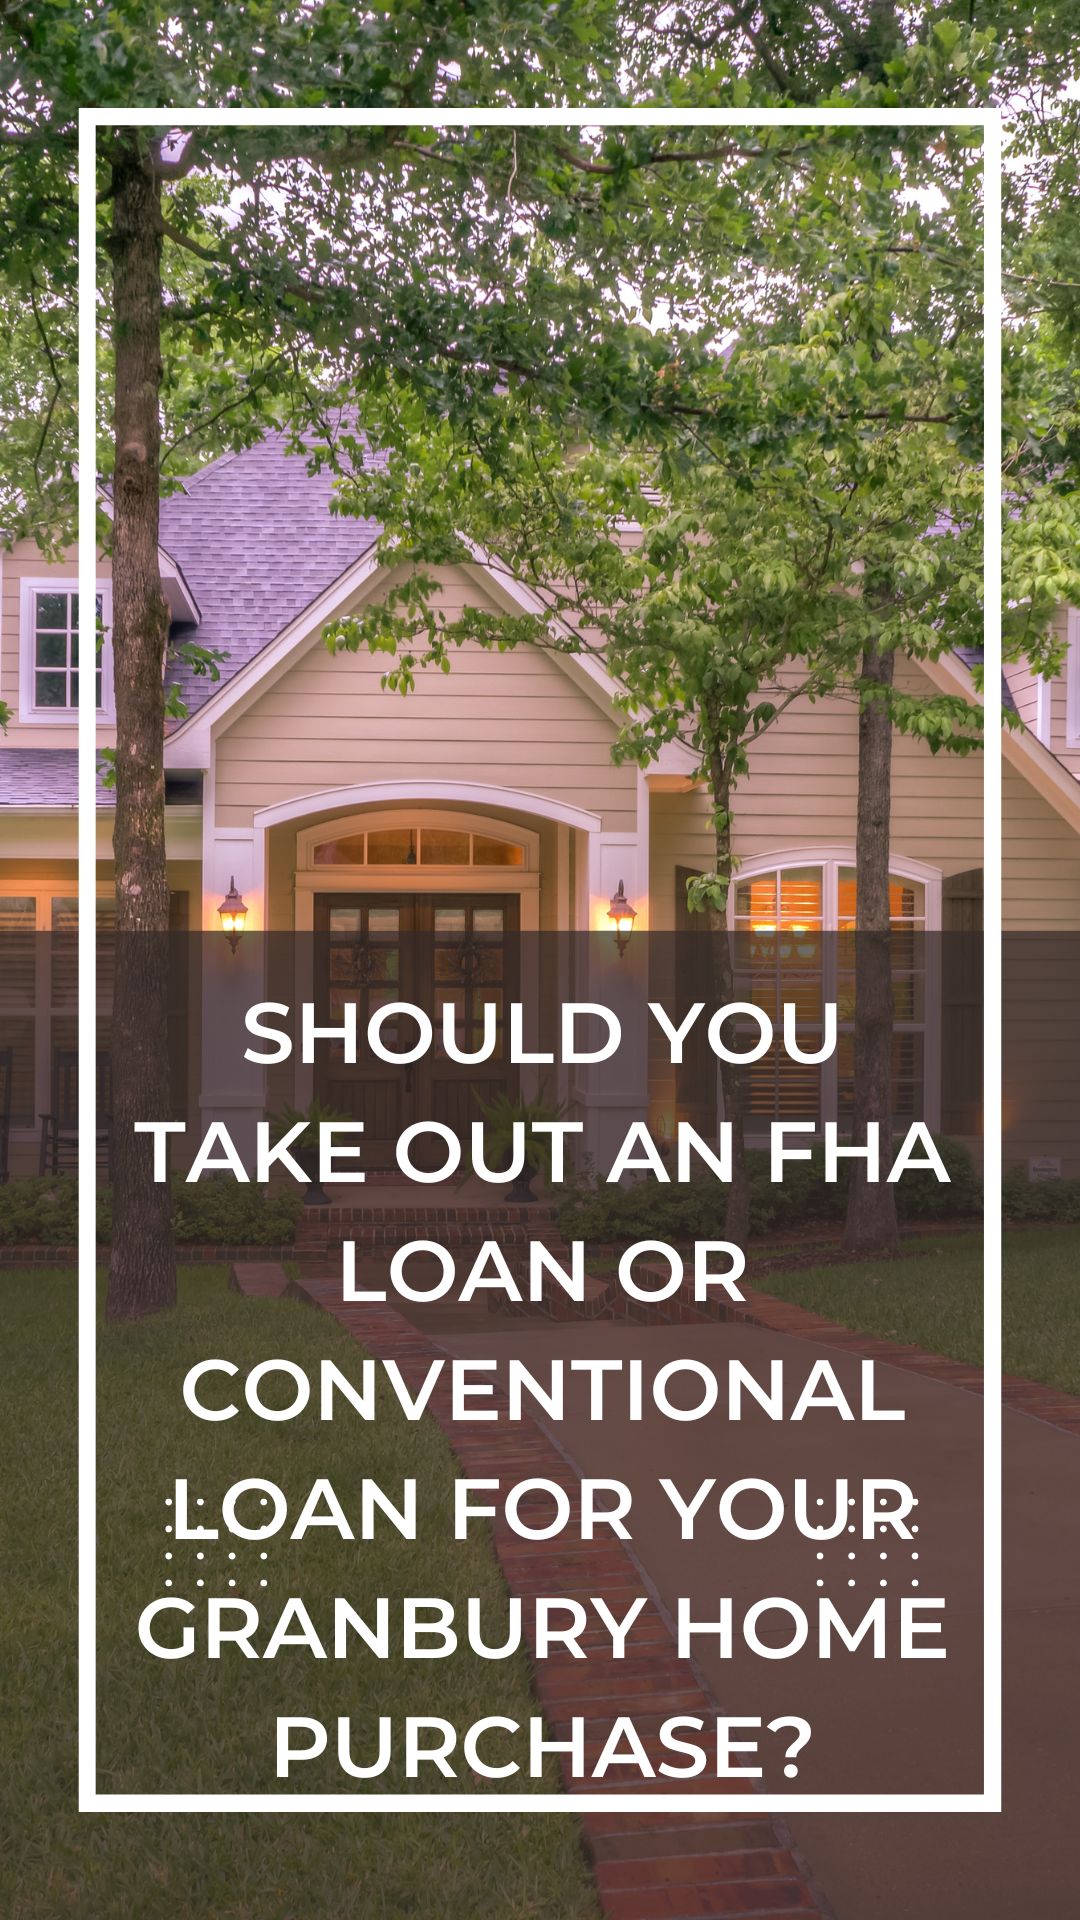 Should You Take Out an FHA Loan or Conventional Loan for Your Granbury Home Purchase?